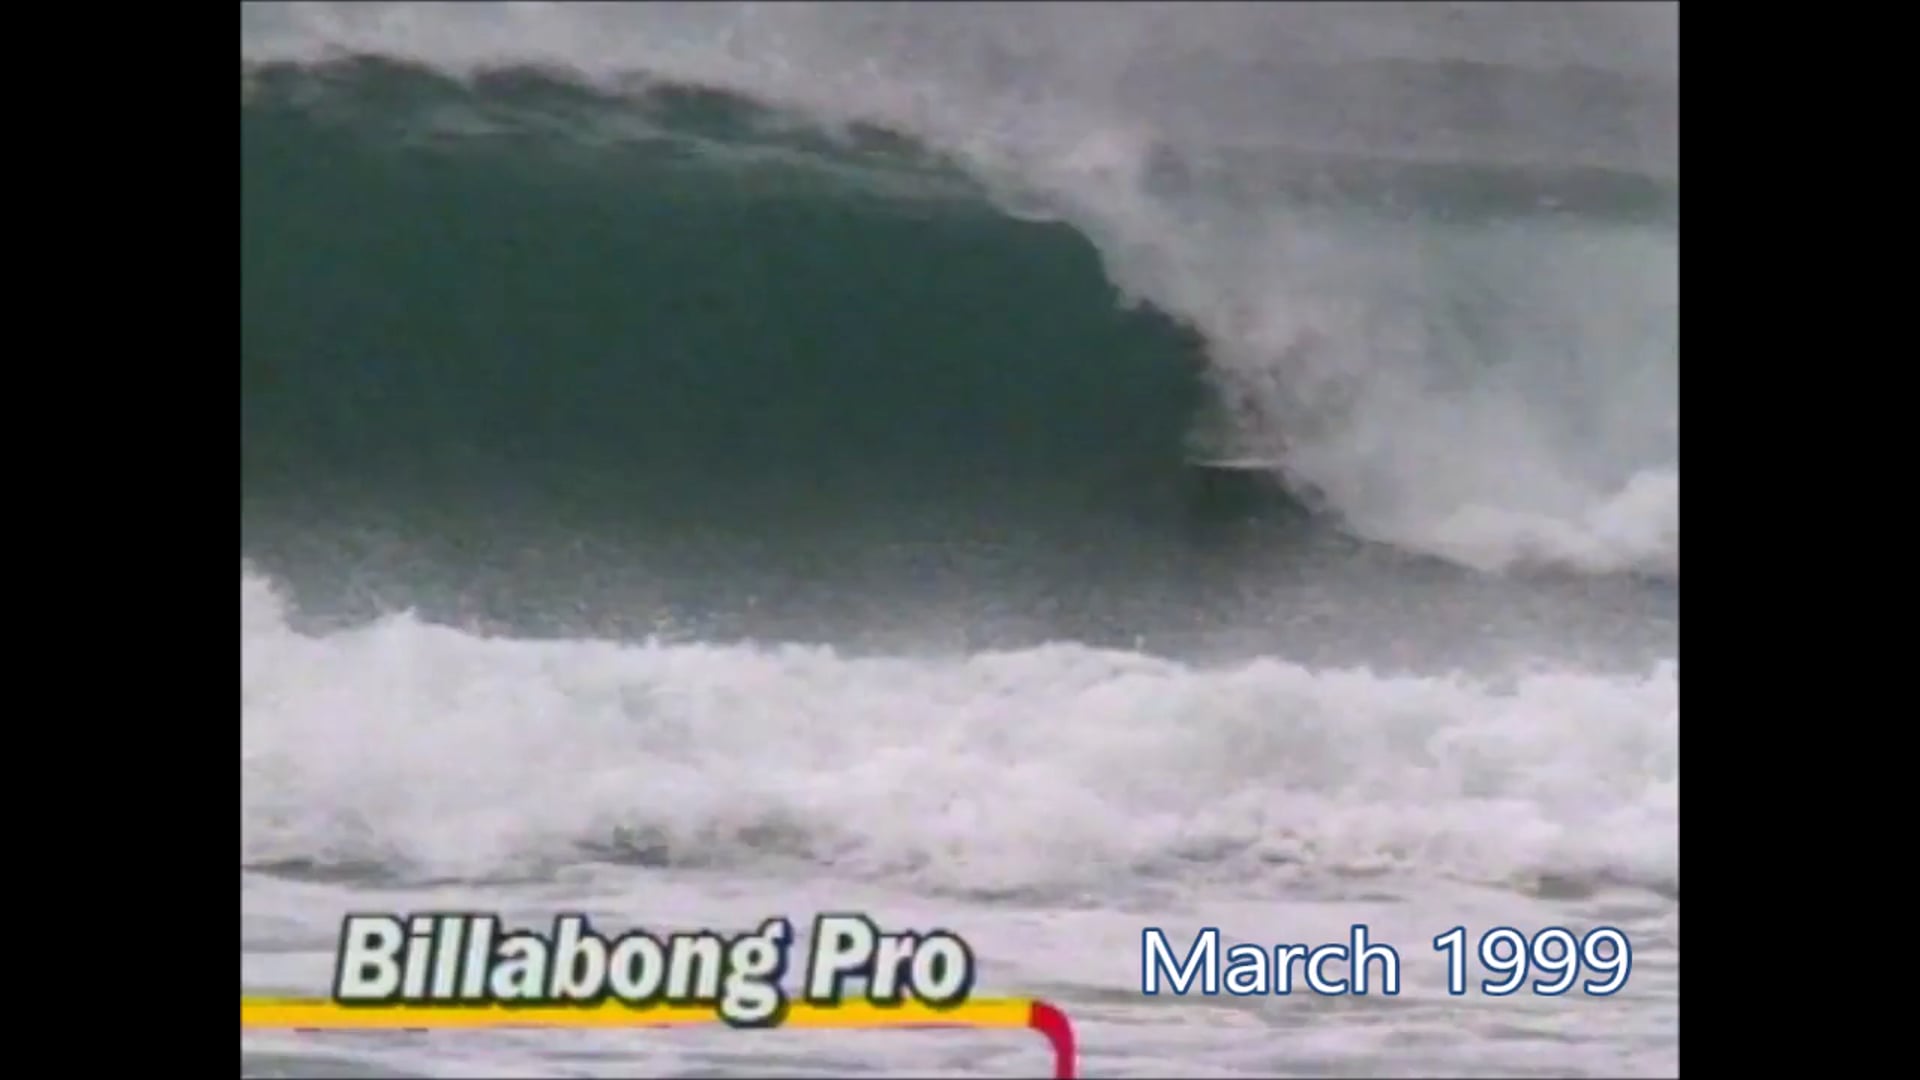 Surfing History: 1999 Billabong Pro – March 1999